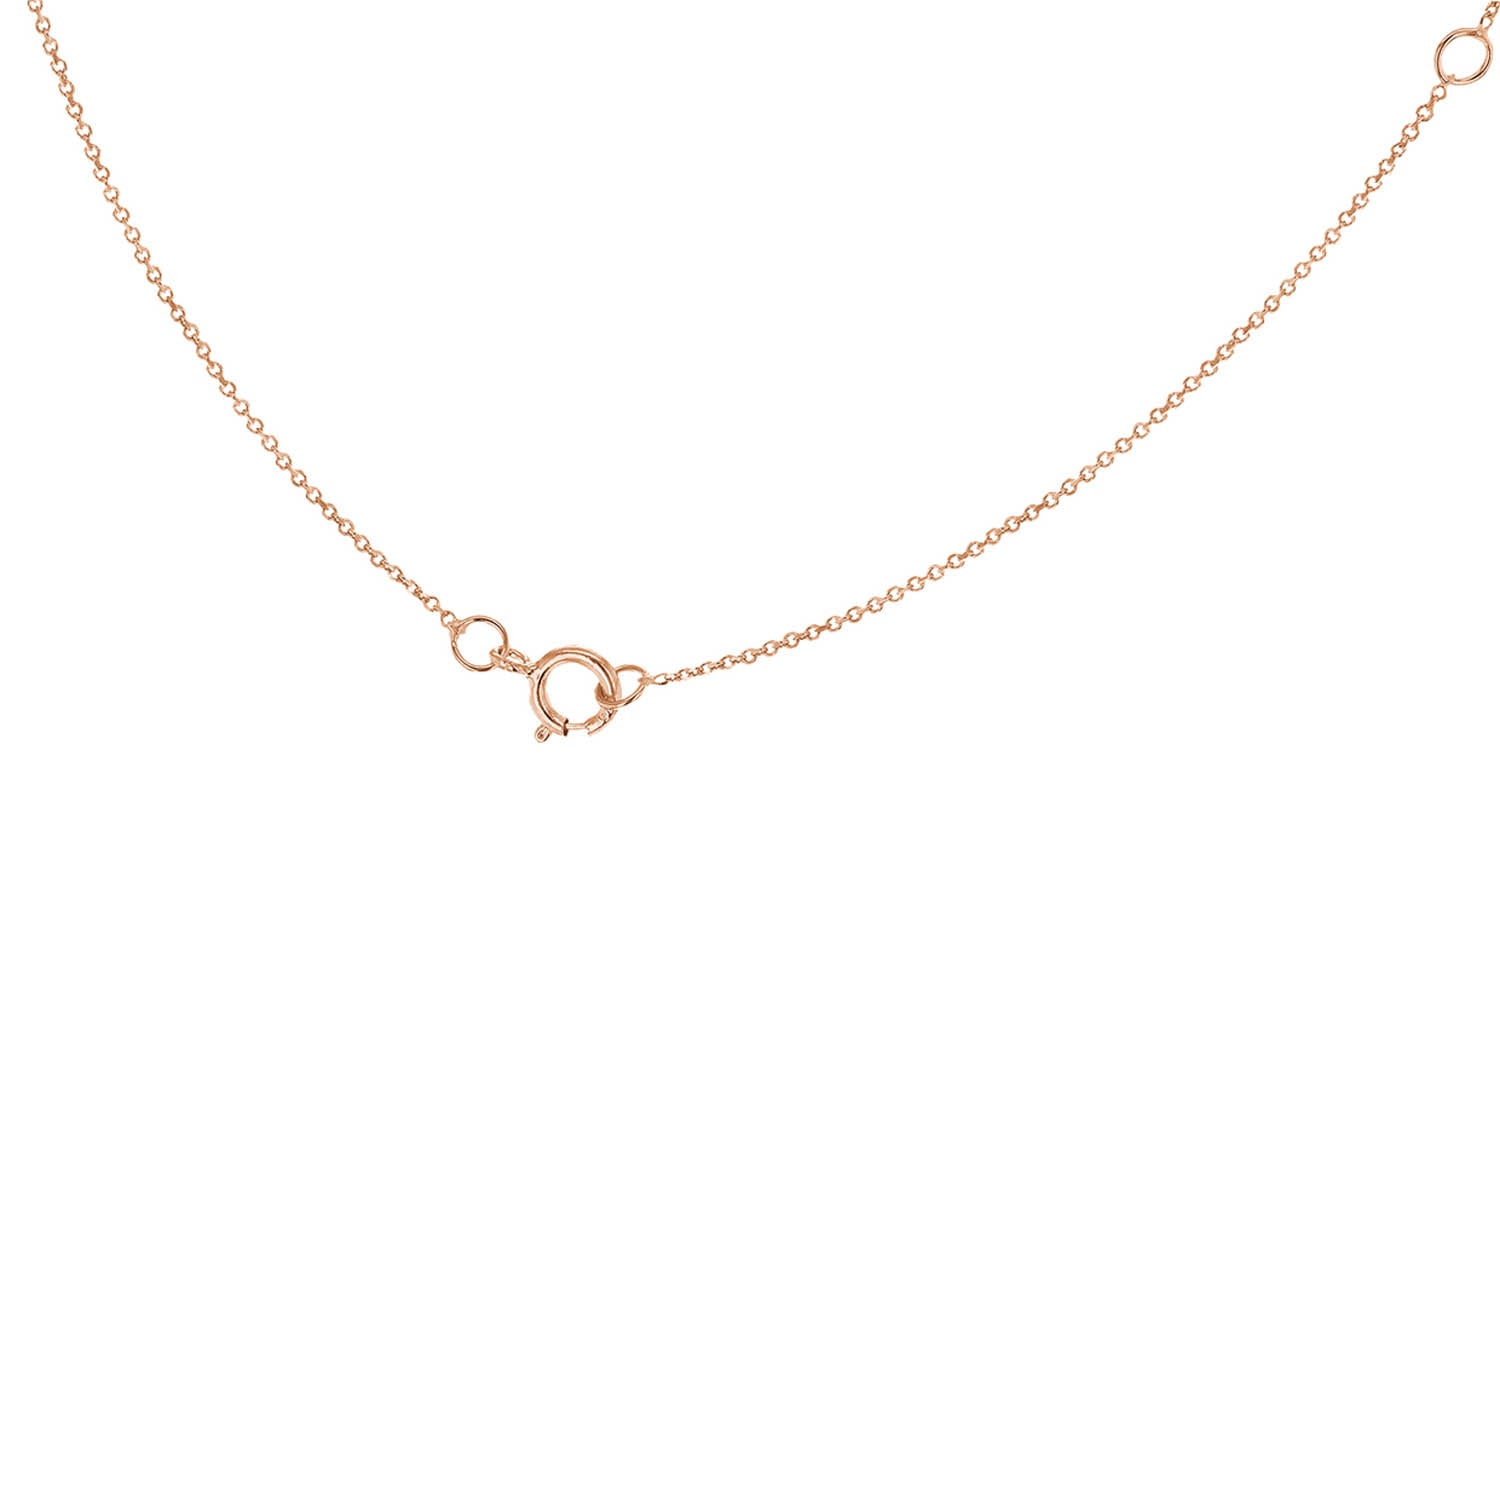 9ct Rose Gold 'A' Initial Adjustable Letter Necklace 38/43cm